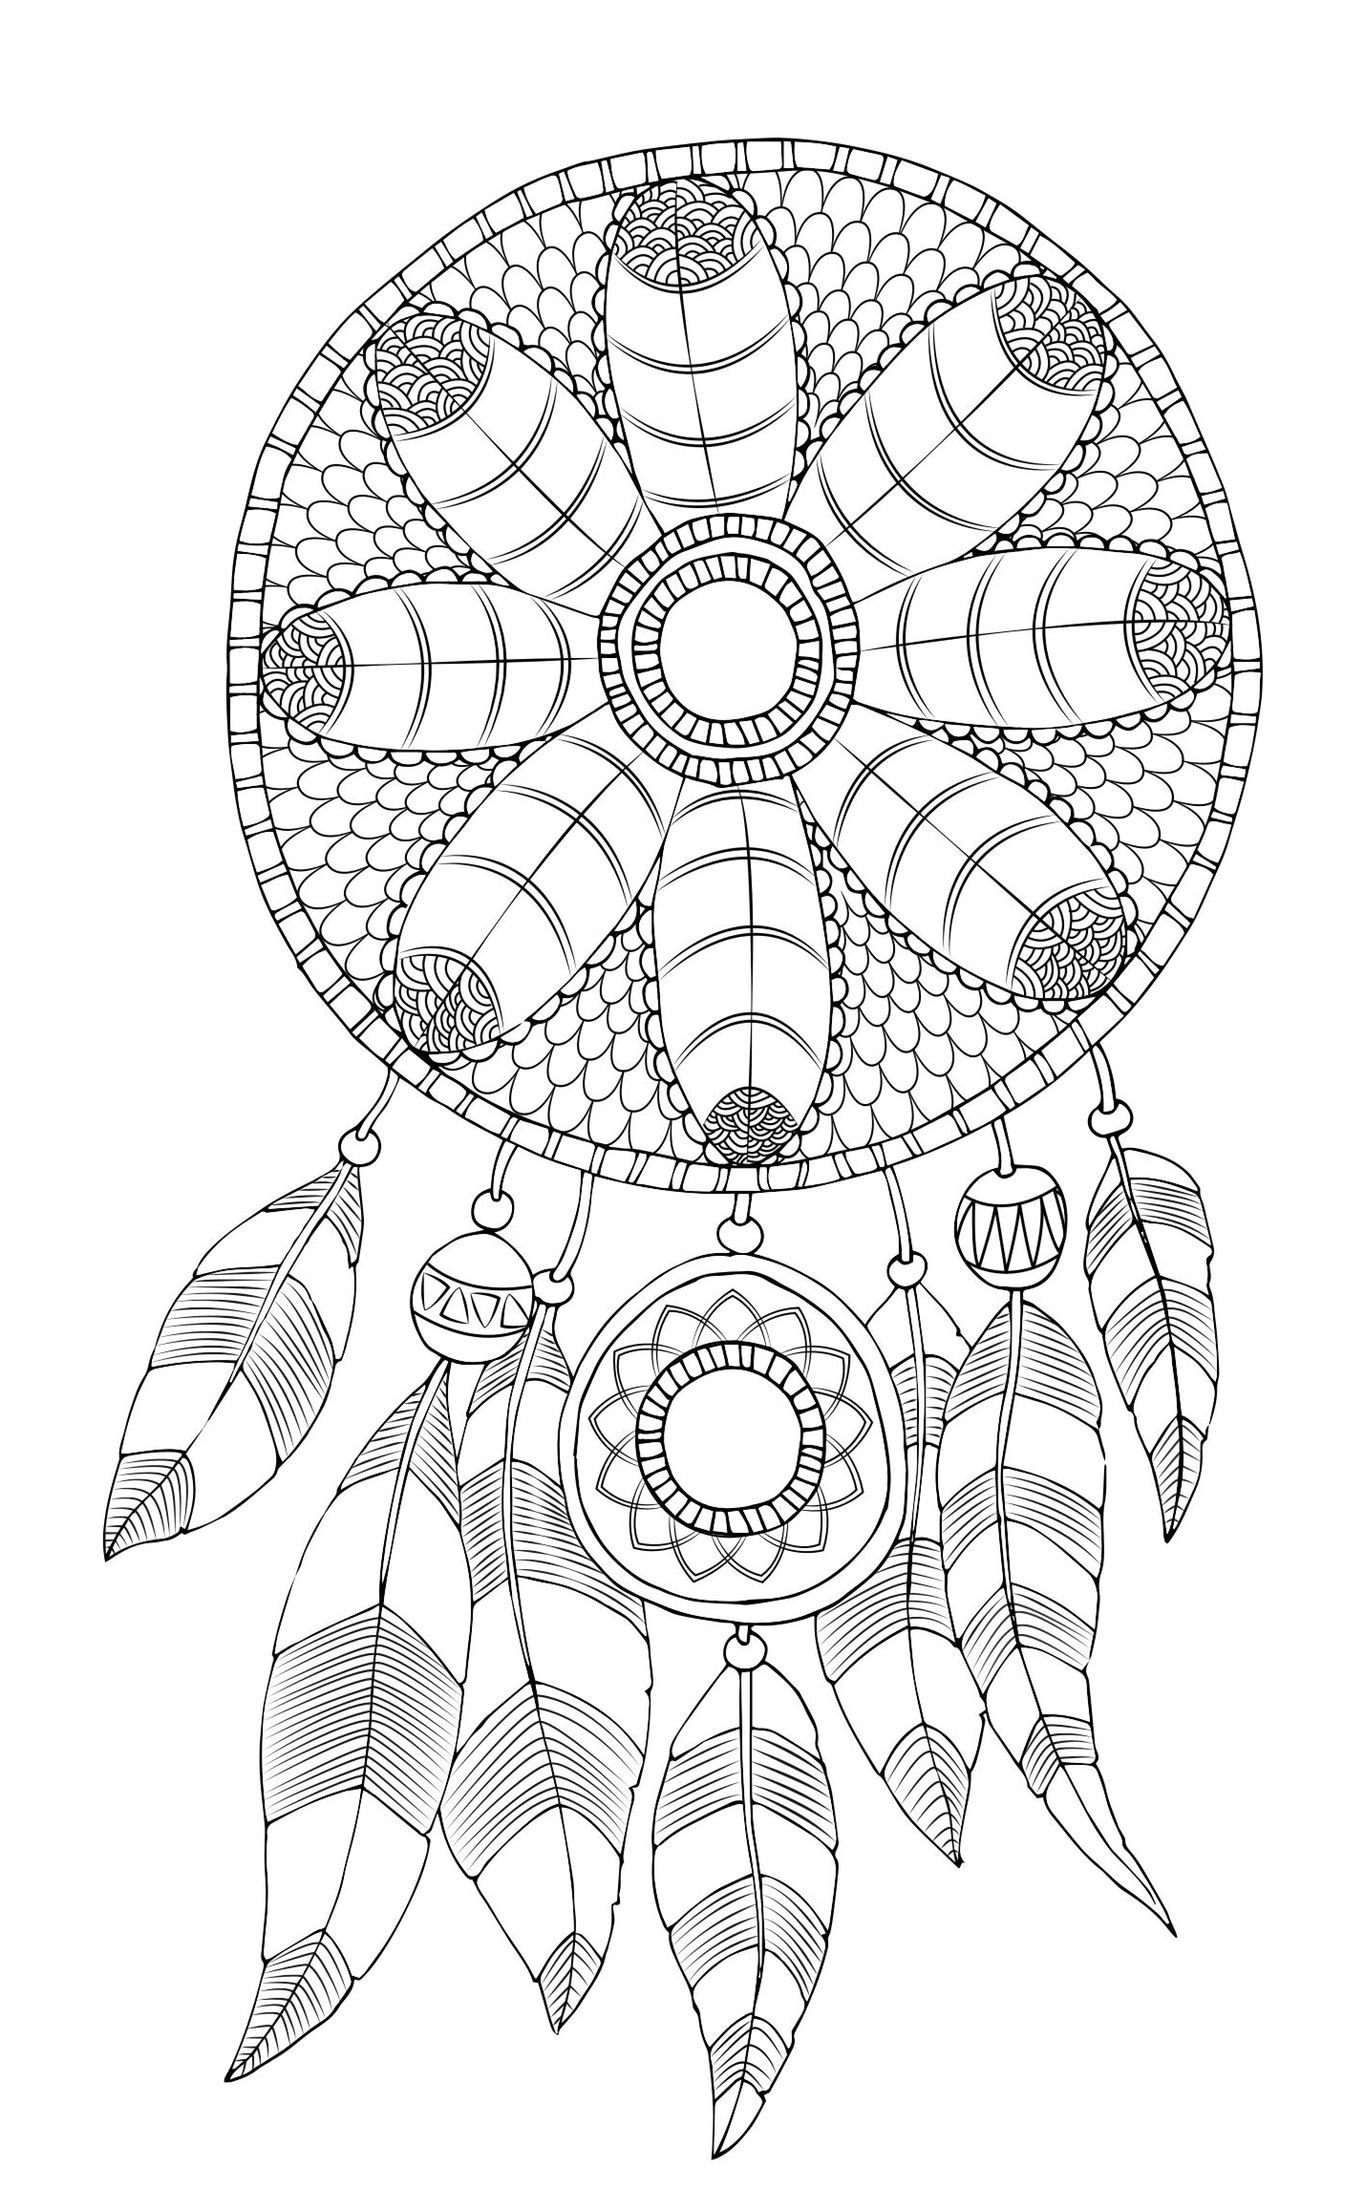 Coloring Sheets For Girls With The Words Dream
 Free adult coloring page Dreamcatcher